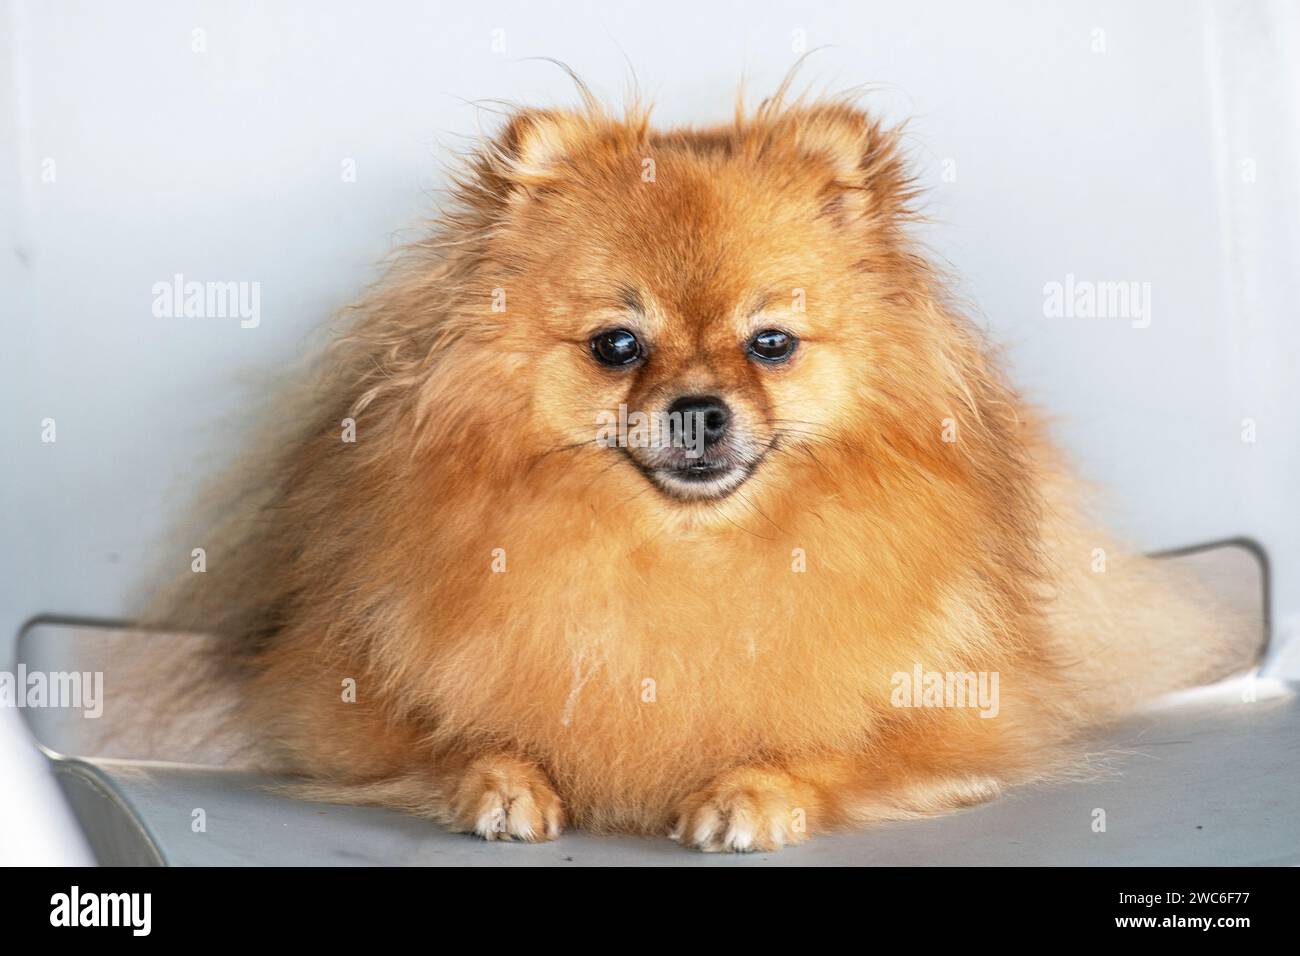 A well behaved, smiling Pomeranian dog sits in a restauant Stock Photo